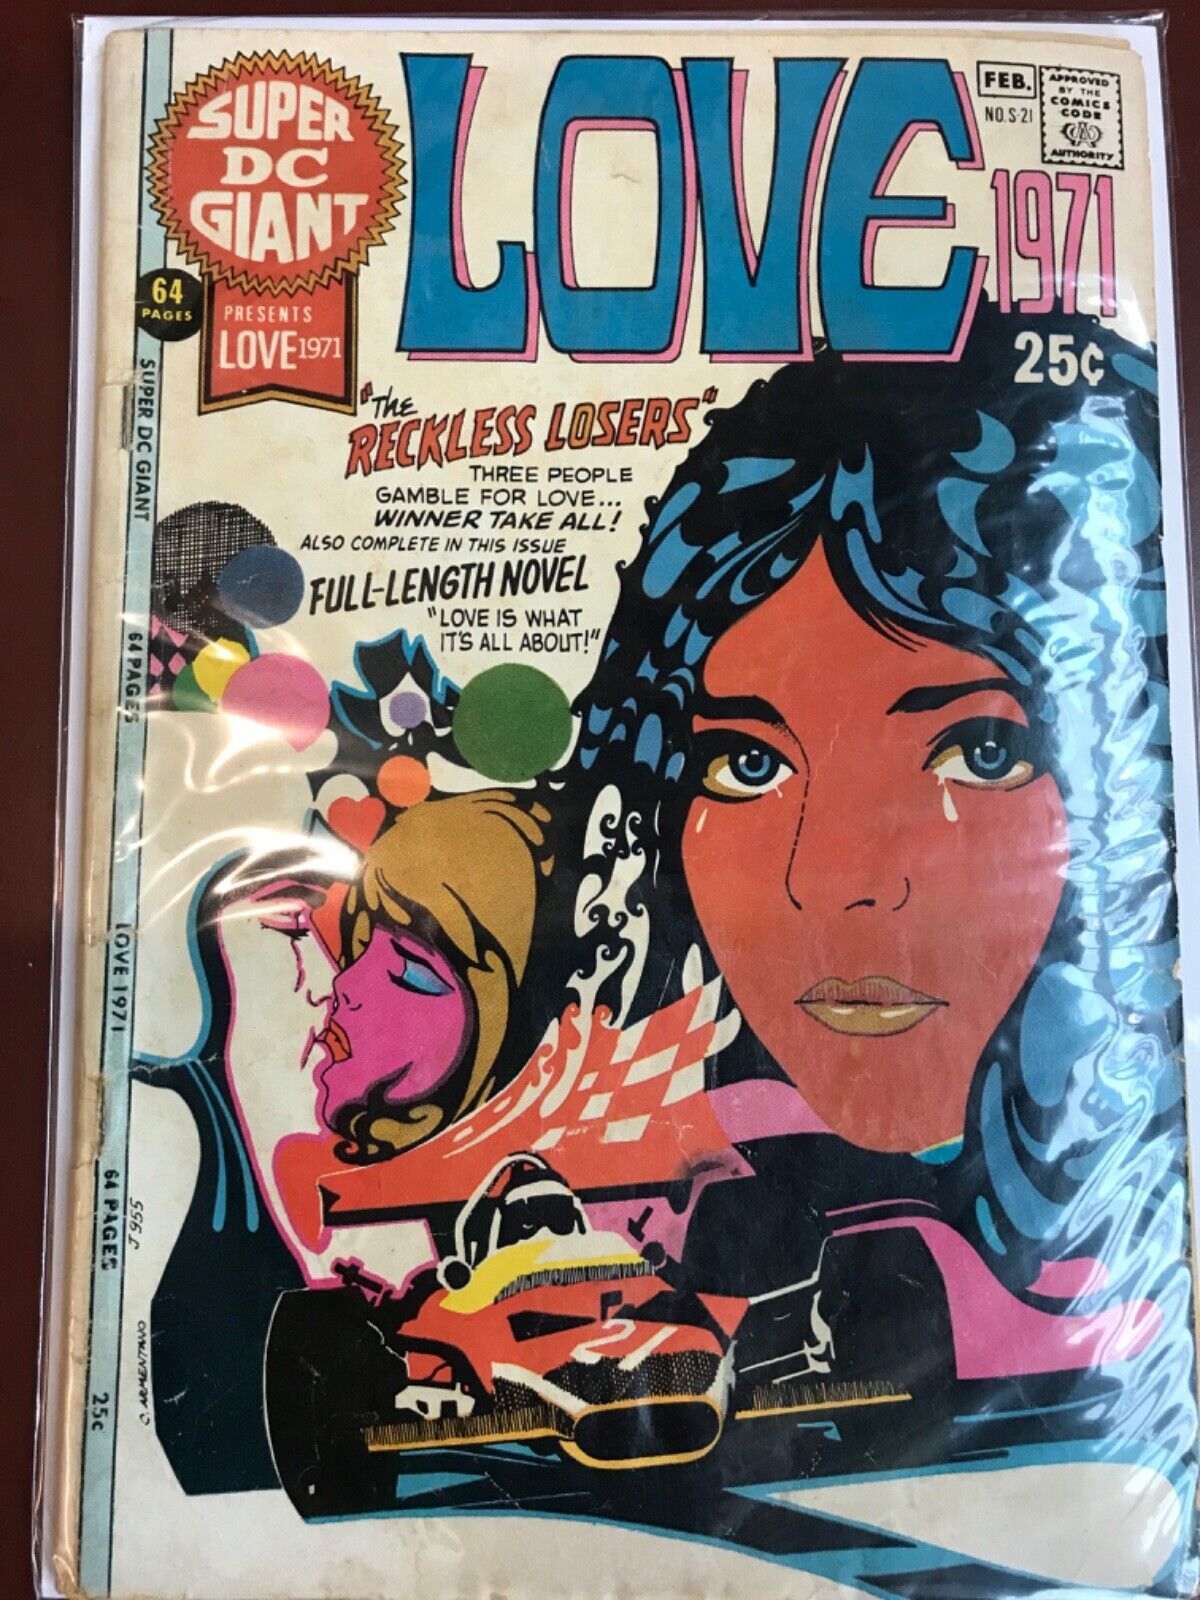 Super DC Giant s-21 VG Love 1971 HTF Highly Sought After Pop Art Groovy RARE